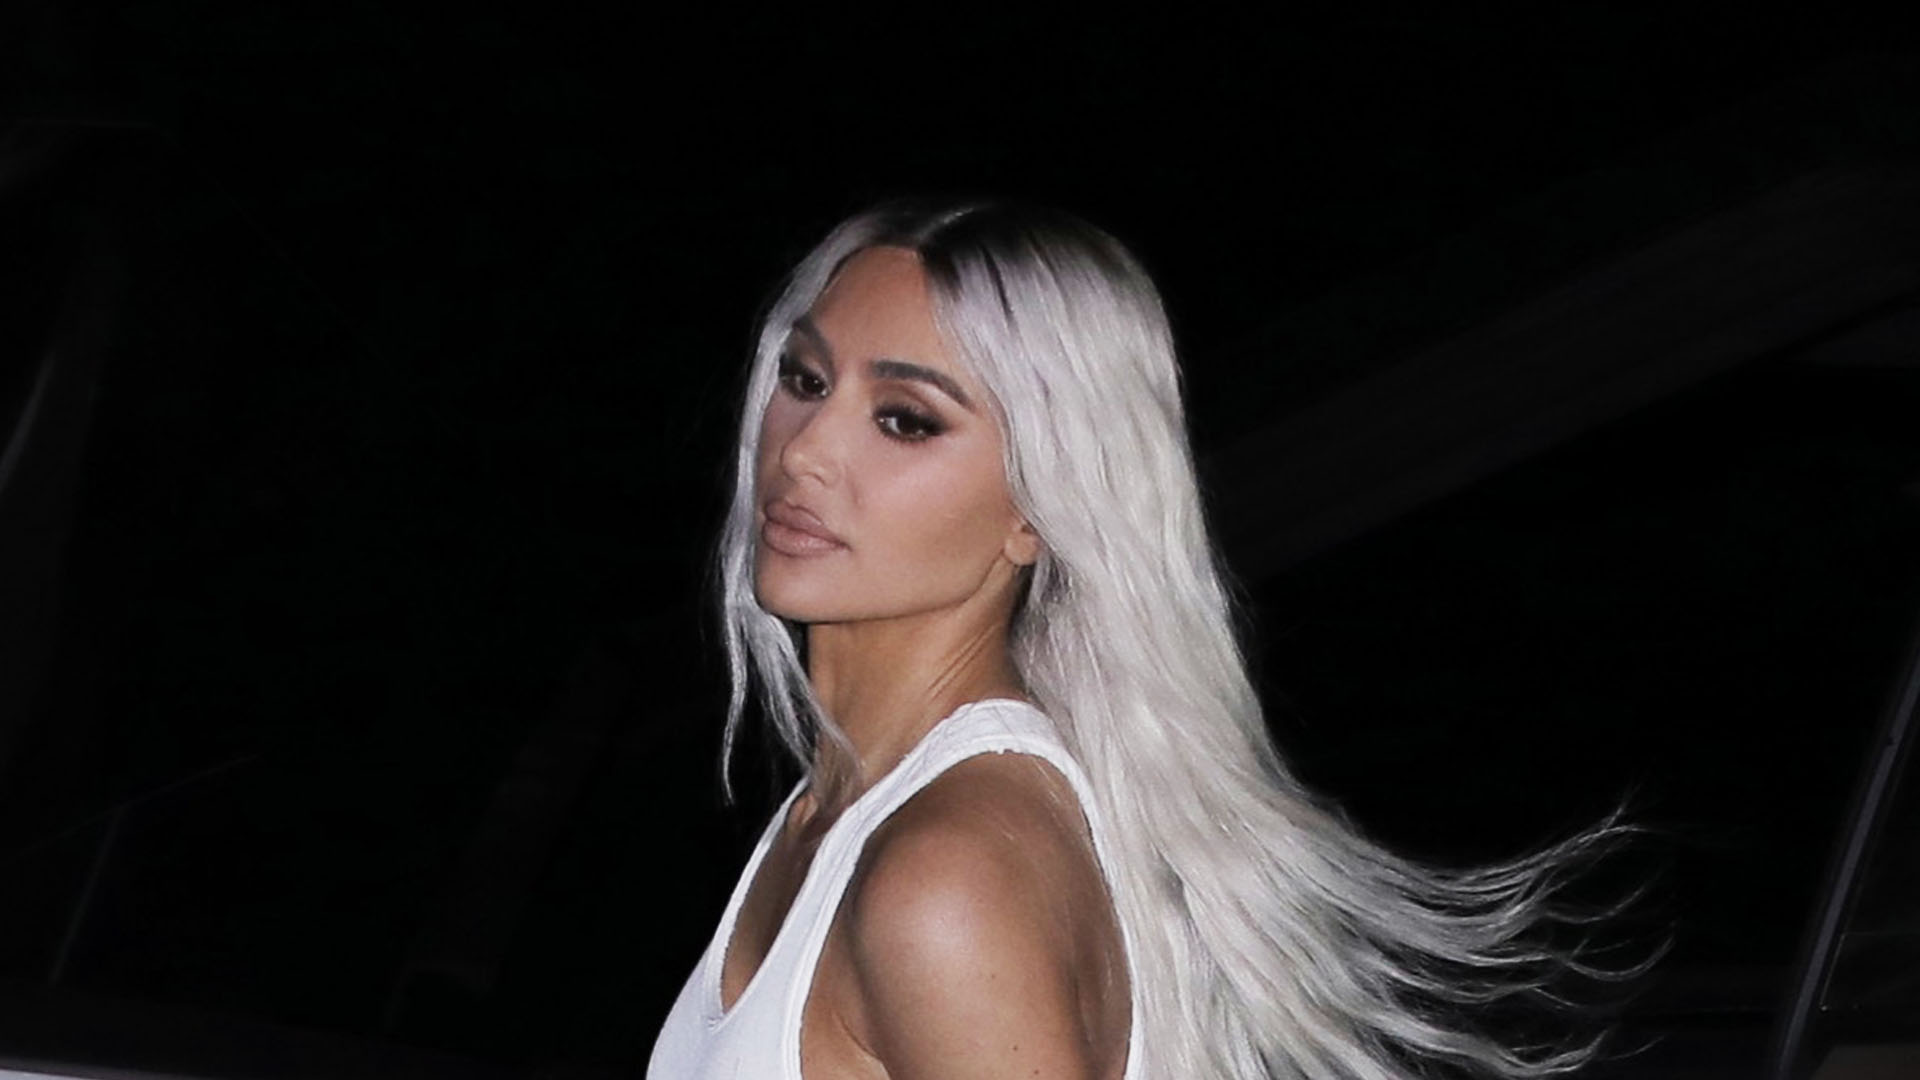 Kim Kardashian Stuns in Blonde Hair & Leather Pants as She Emerges from Tesla Truck – A Celeb Style Transformation!